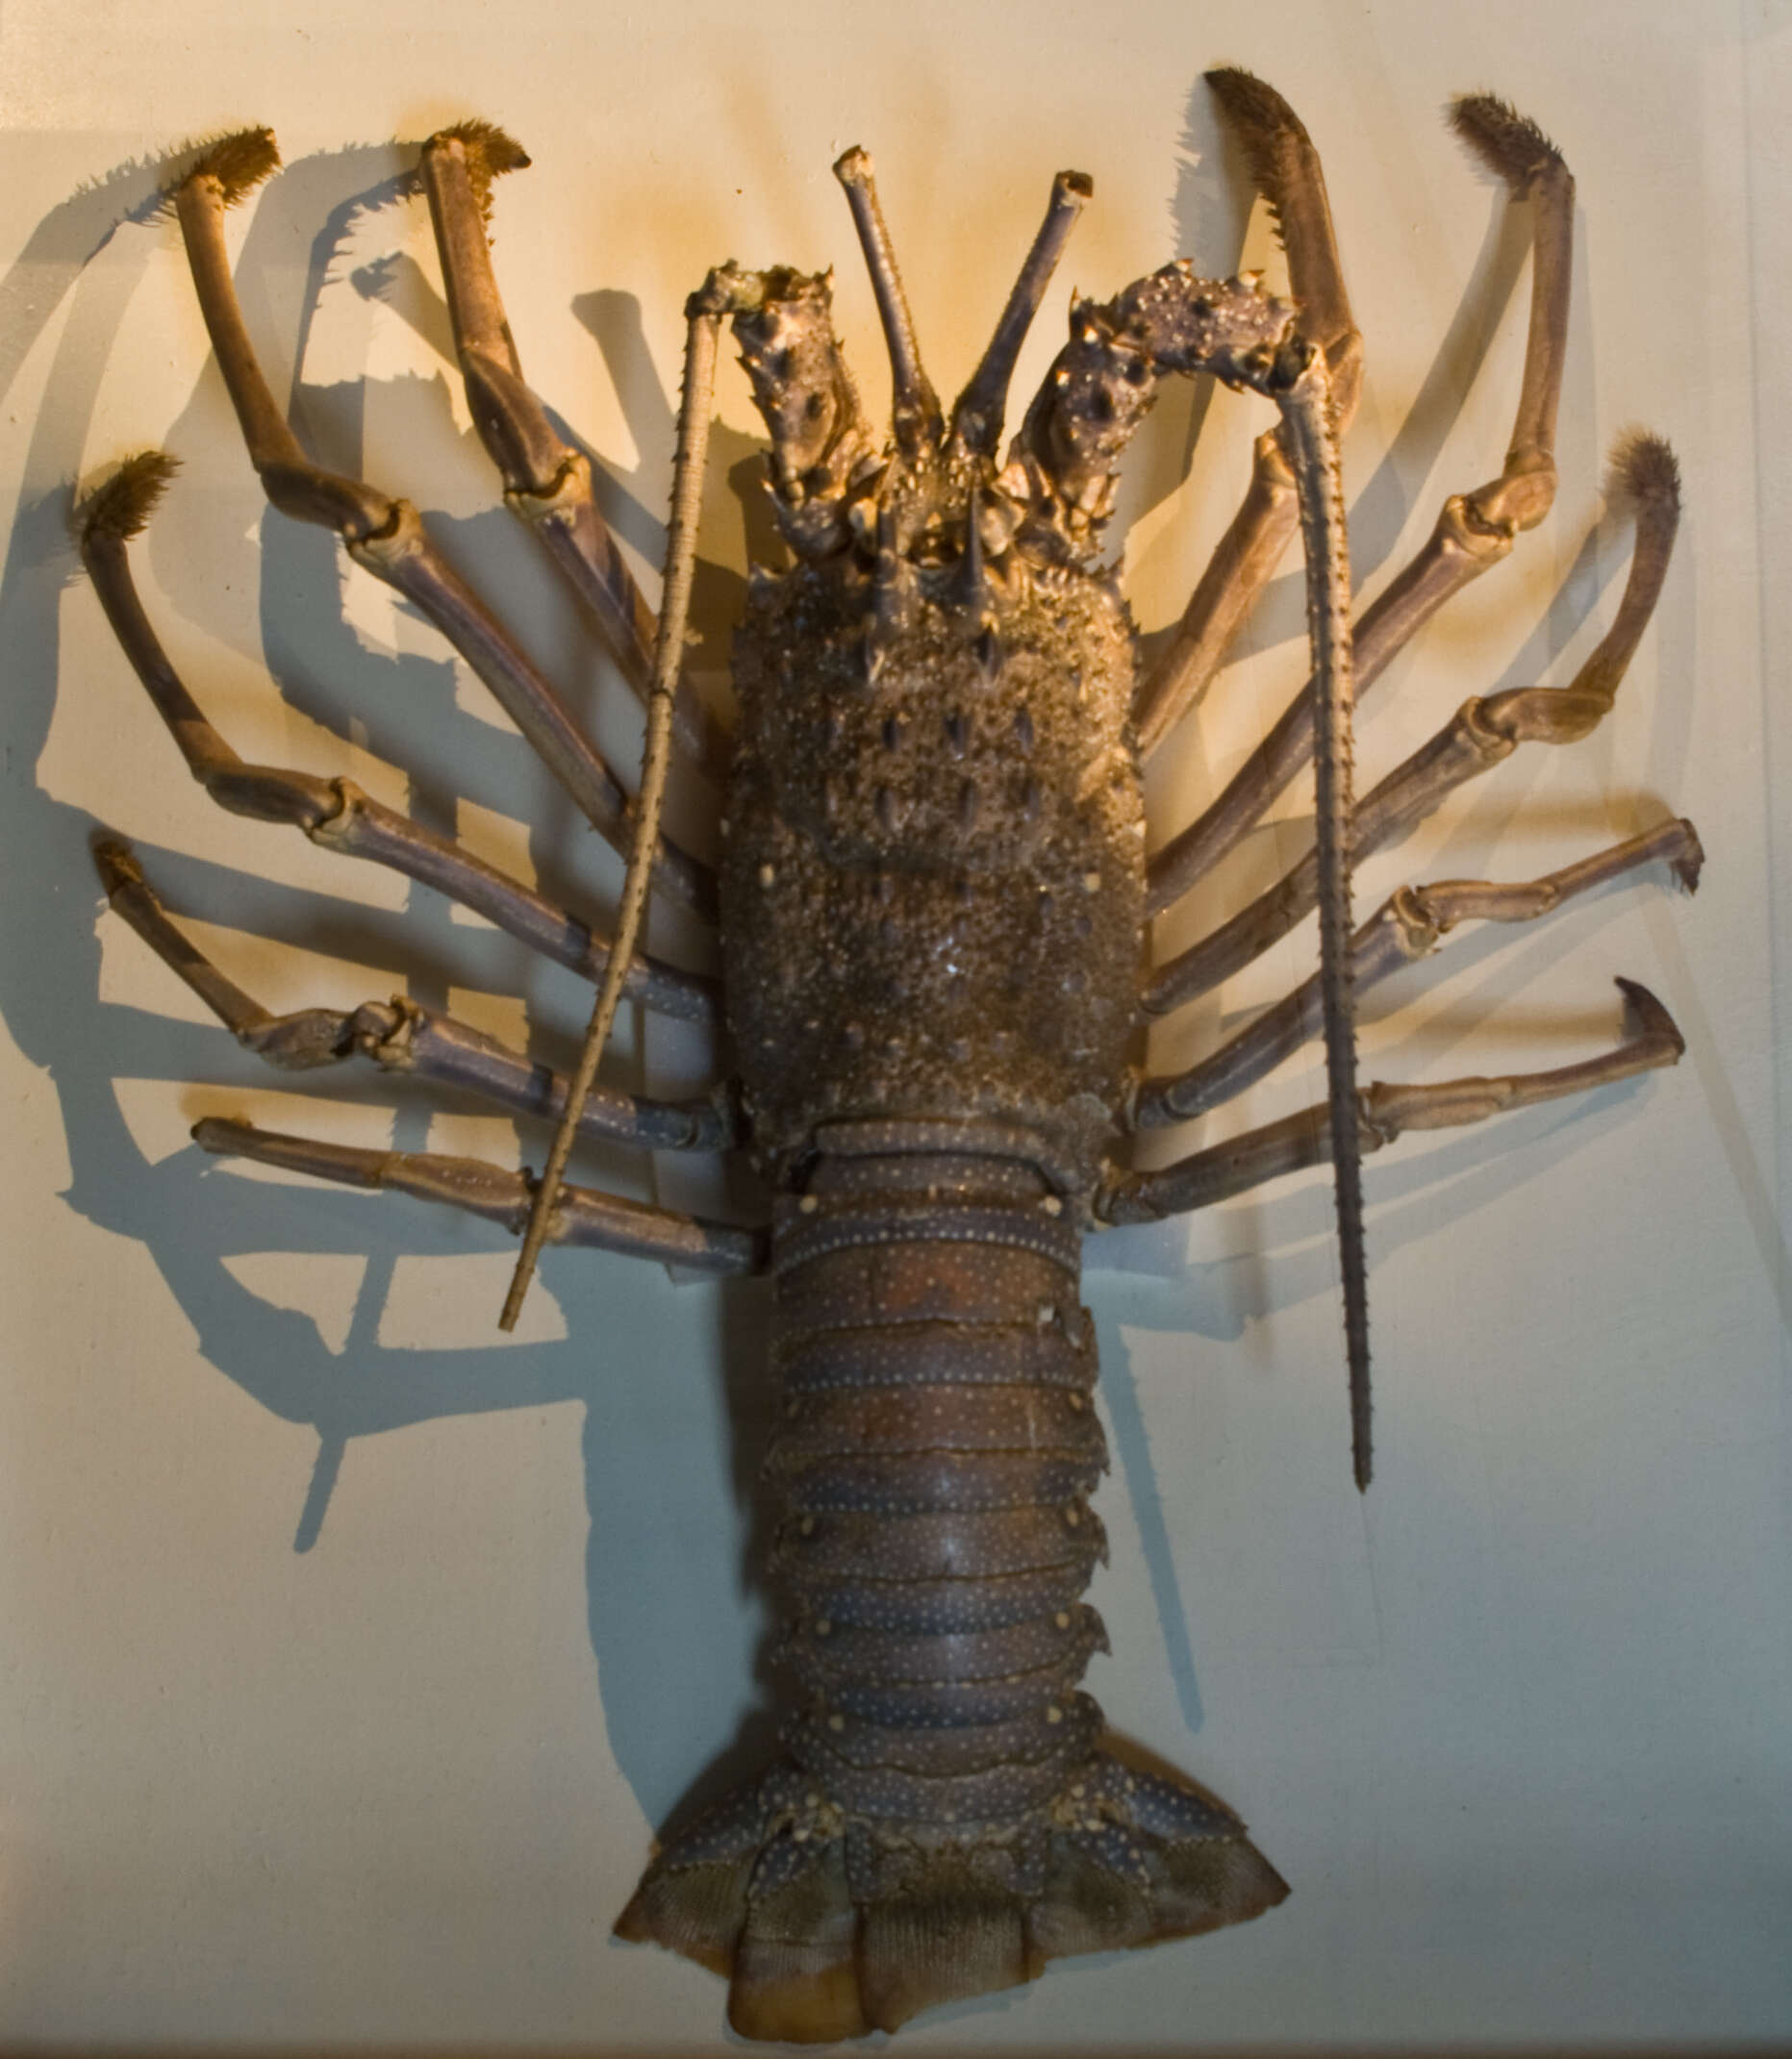 Image of Japanese Spiny Lobster